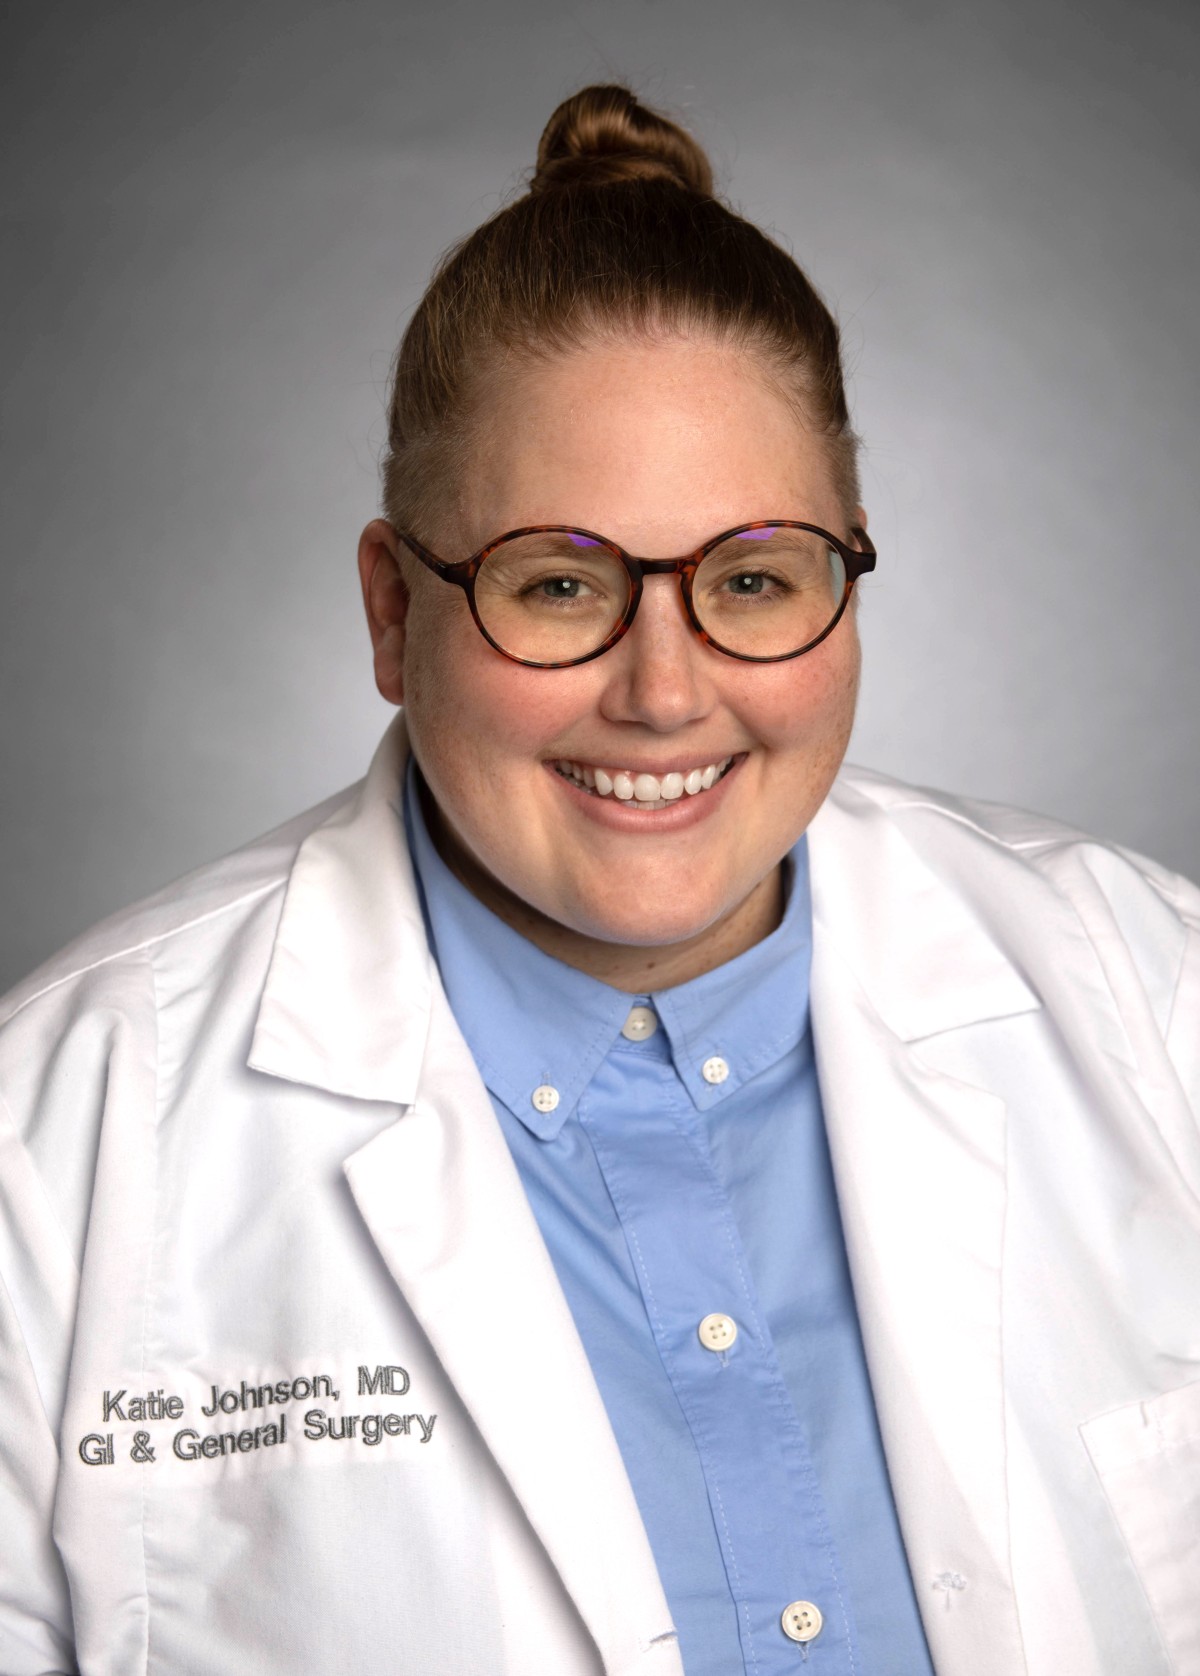 Dr. Katie Johnson to provide General Surgery Care to McMinnville Community